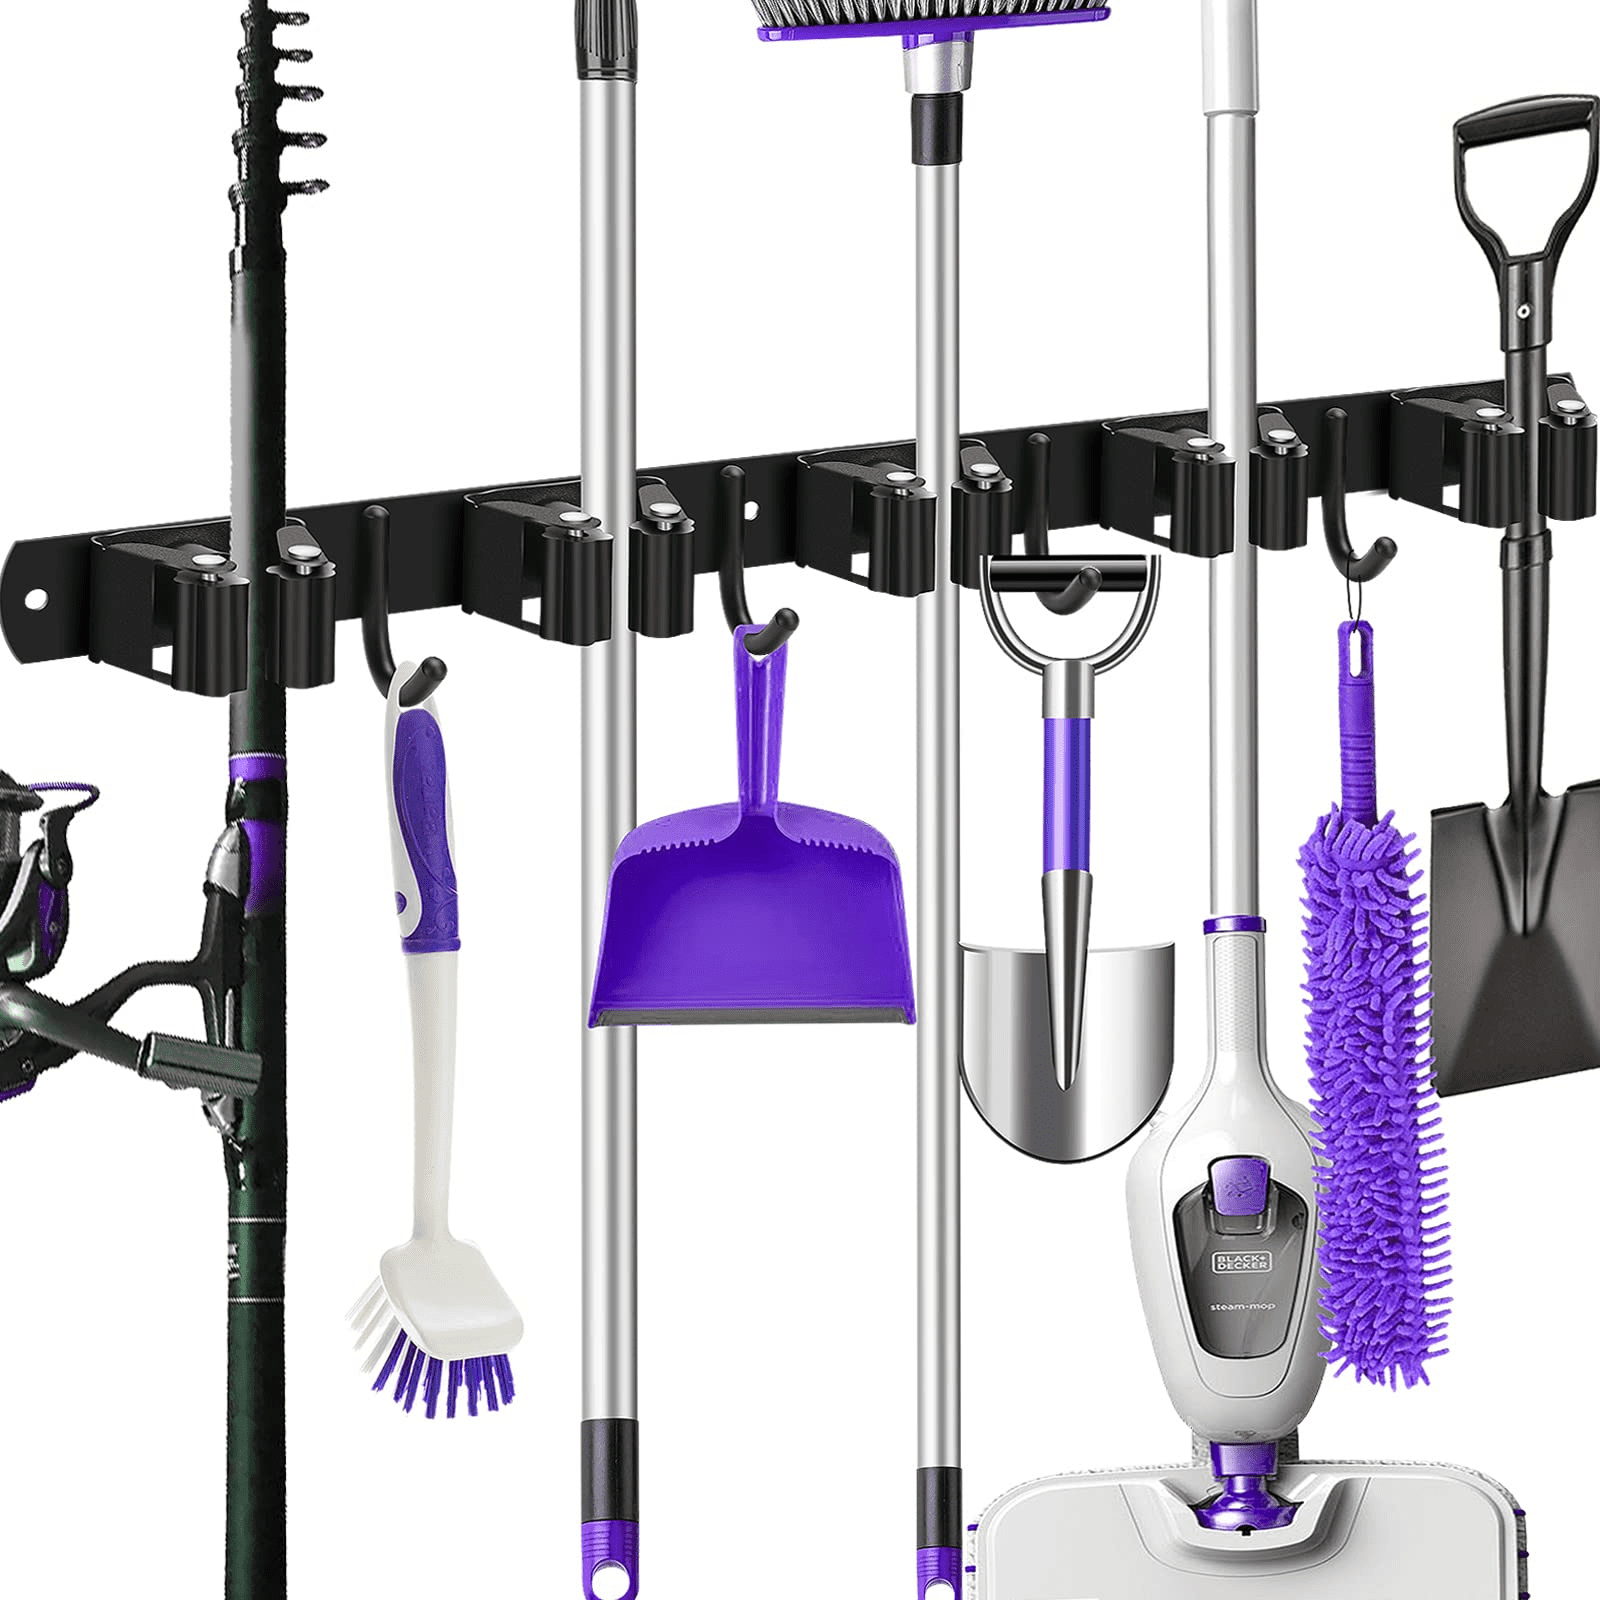 U.S. Solid Mop and Broom Holder, Wall Mounted, 4 Slots & 4 Hooks, Garden  Tool Organizer, 20 Inches - U.S. Solid